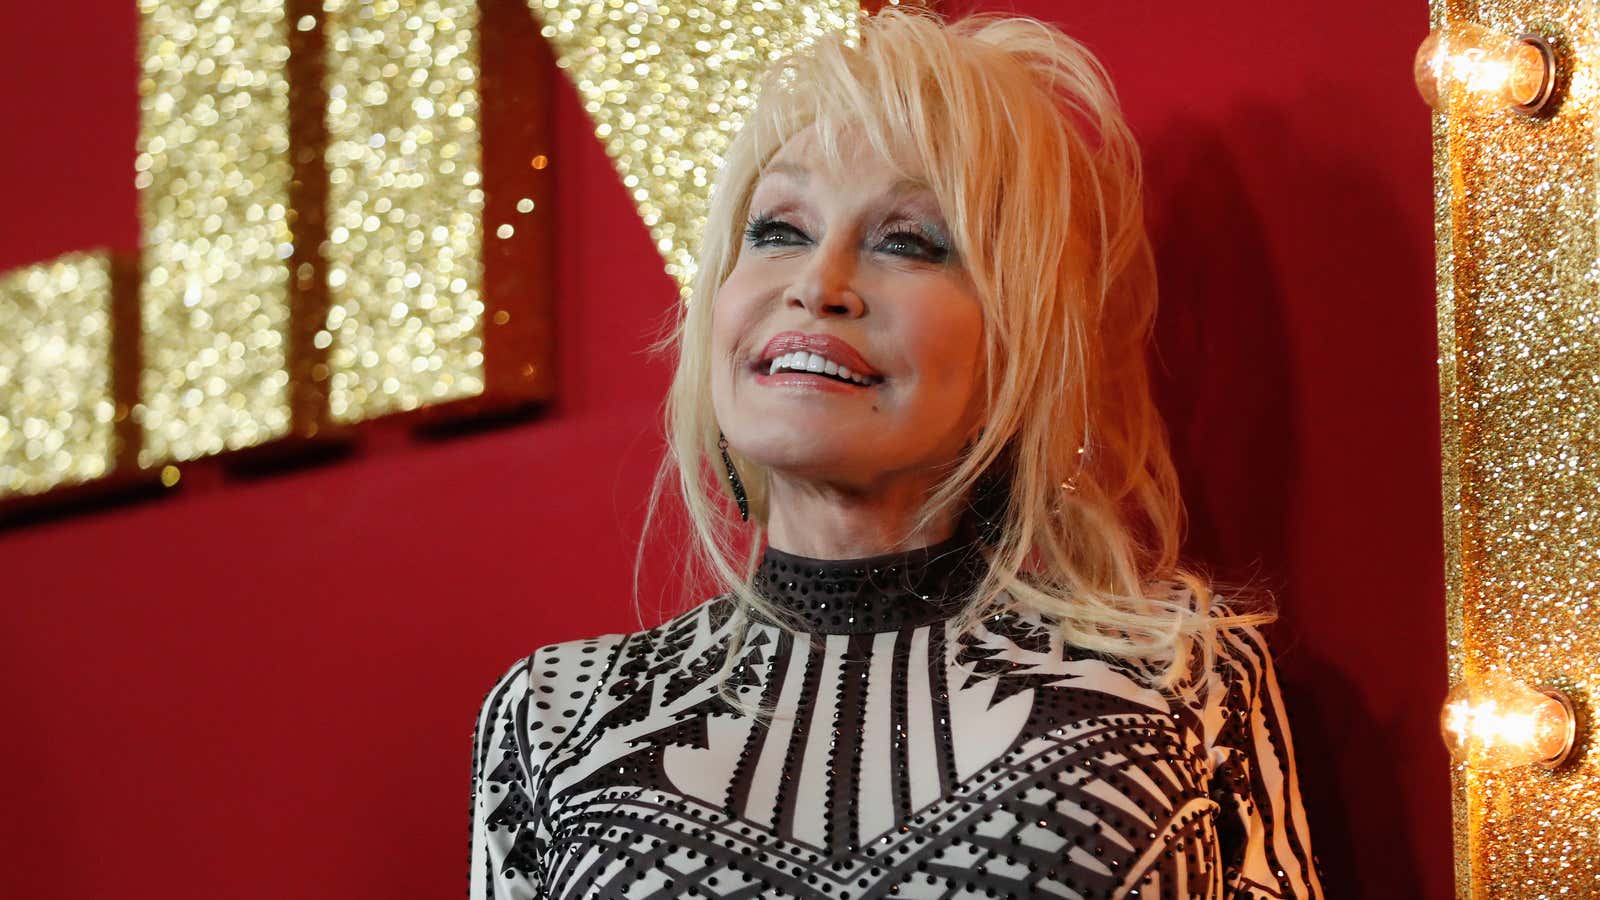 Dolly Parton poses at a premiere for the movie Dumplin’ in Los Angeles, California, U.S., December 6, 2018.